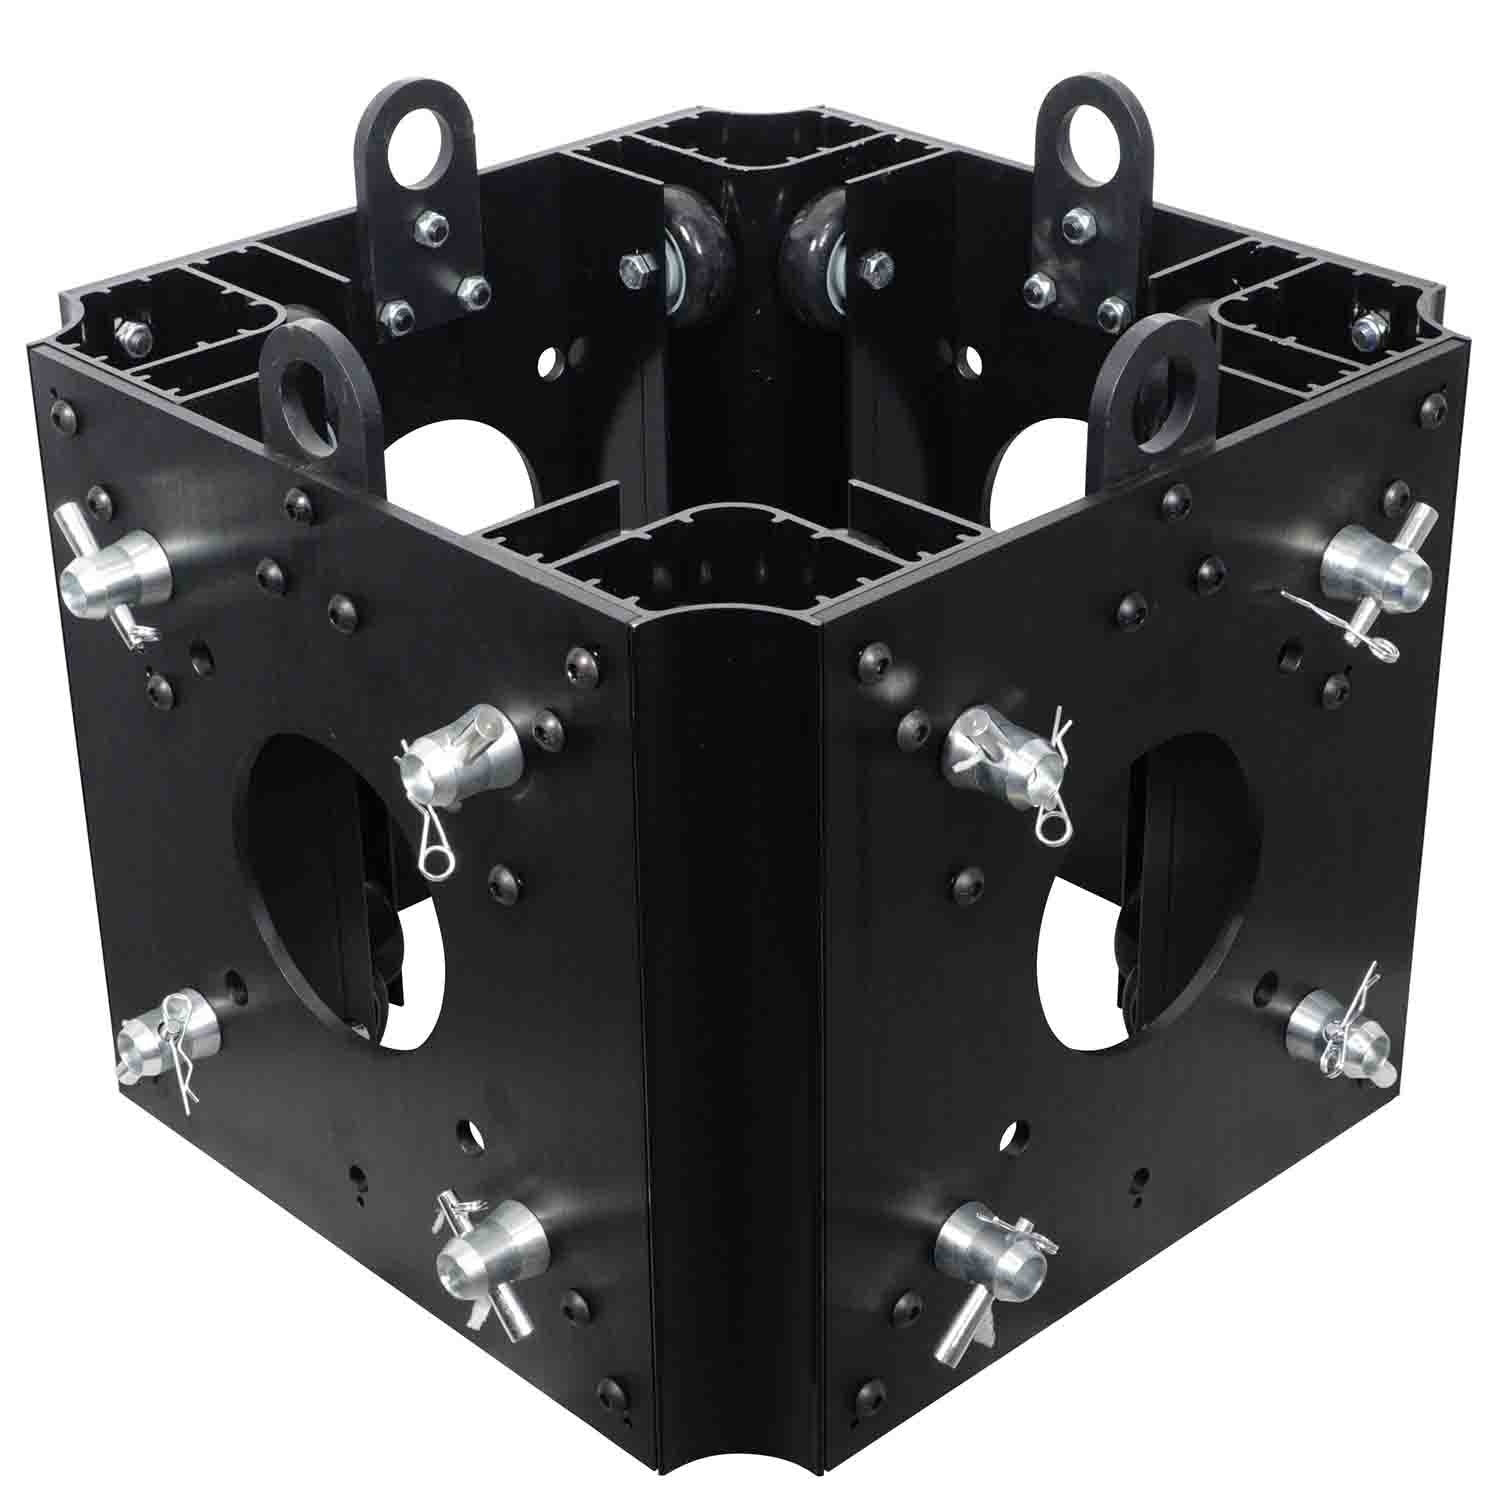 ProX XT-BLOCK-BLK Black Ground Support Sleeve Block for F34 Truss Systems - Hollywood DJ